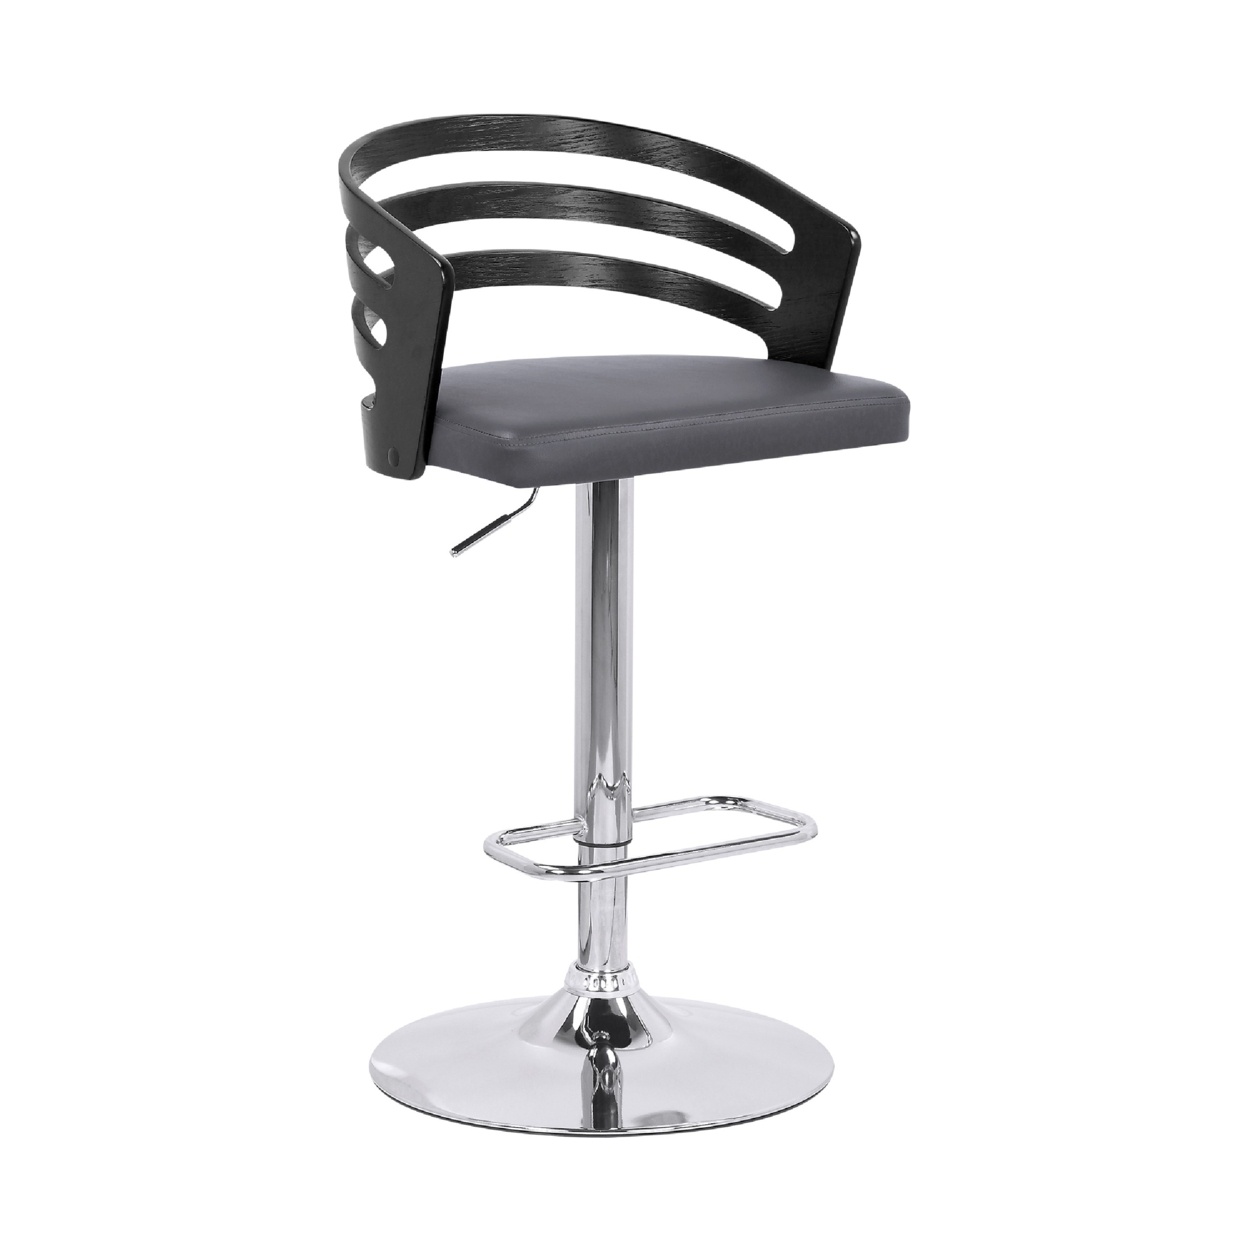 Adjustable Barstool With Curved Open Low Wooden Back, Black And Chrome- Saltoro Sherpi